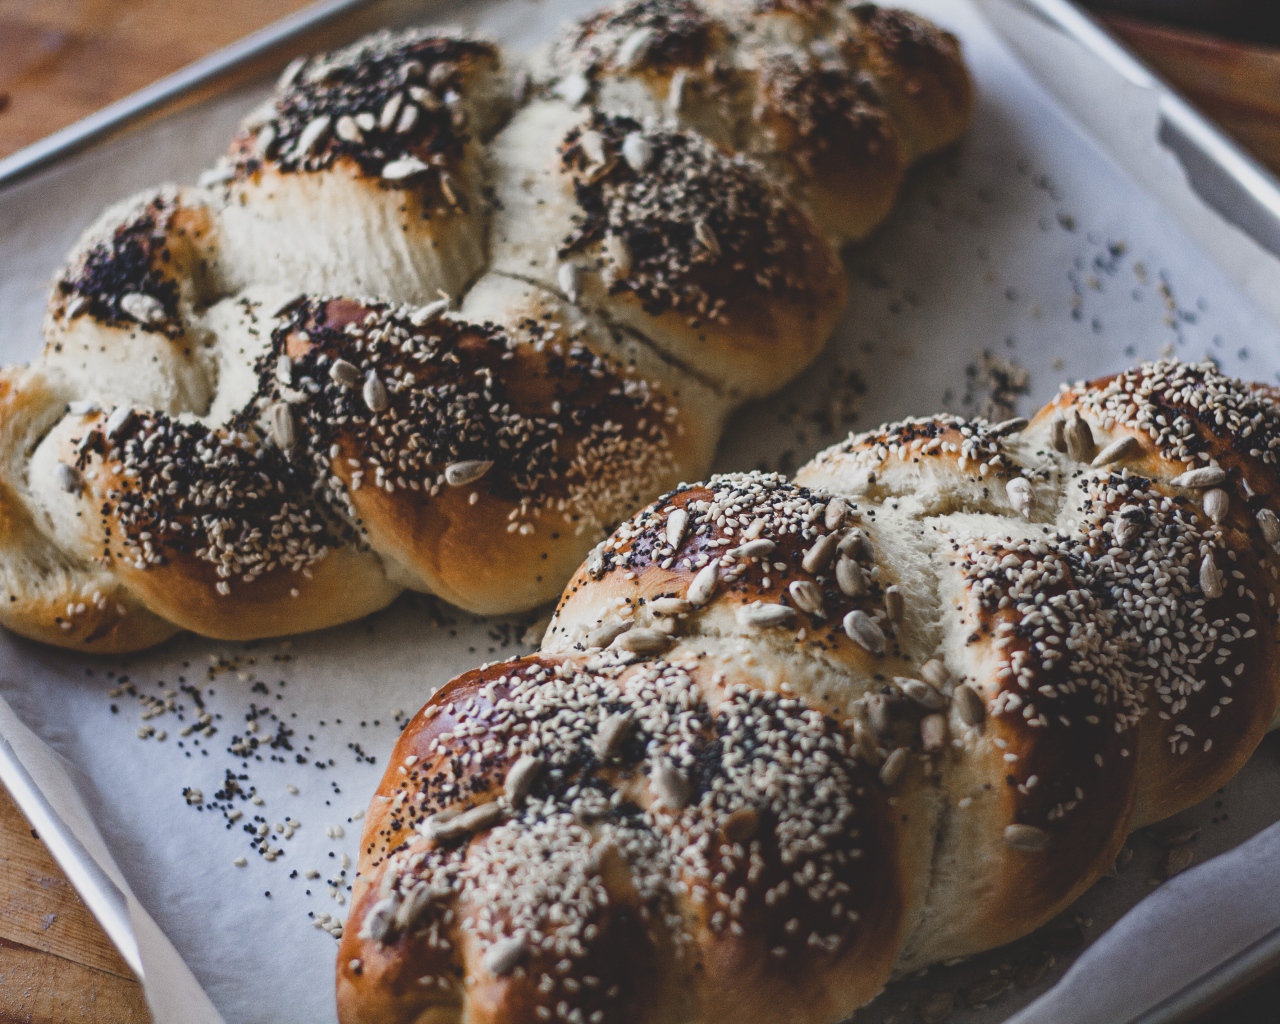 Buns with poppy seeds and seeds